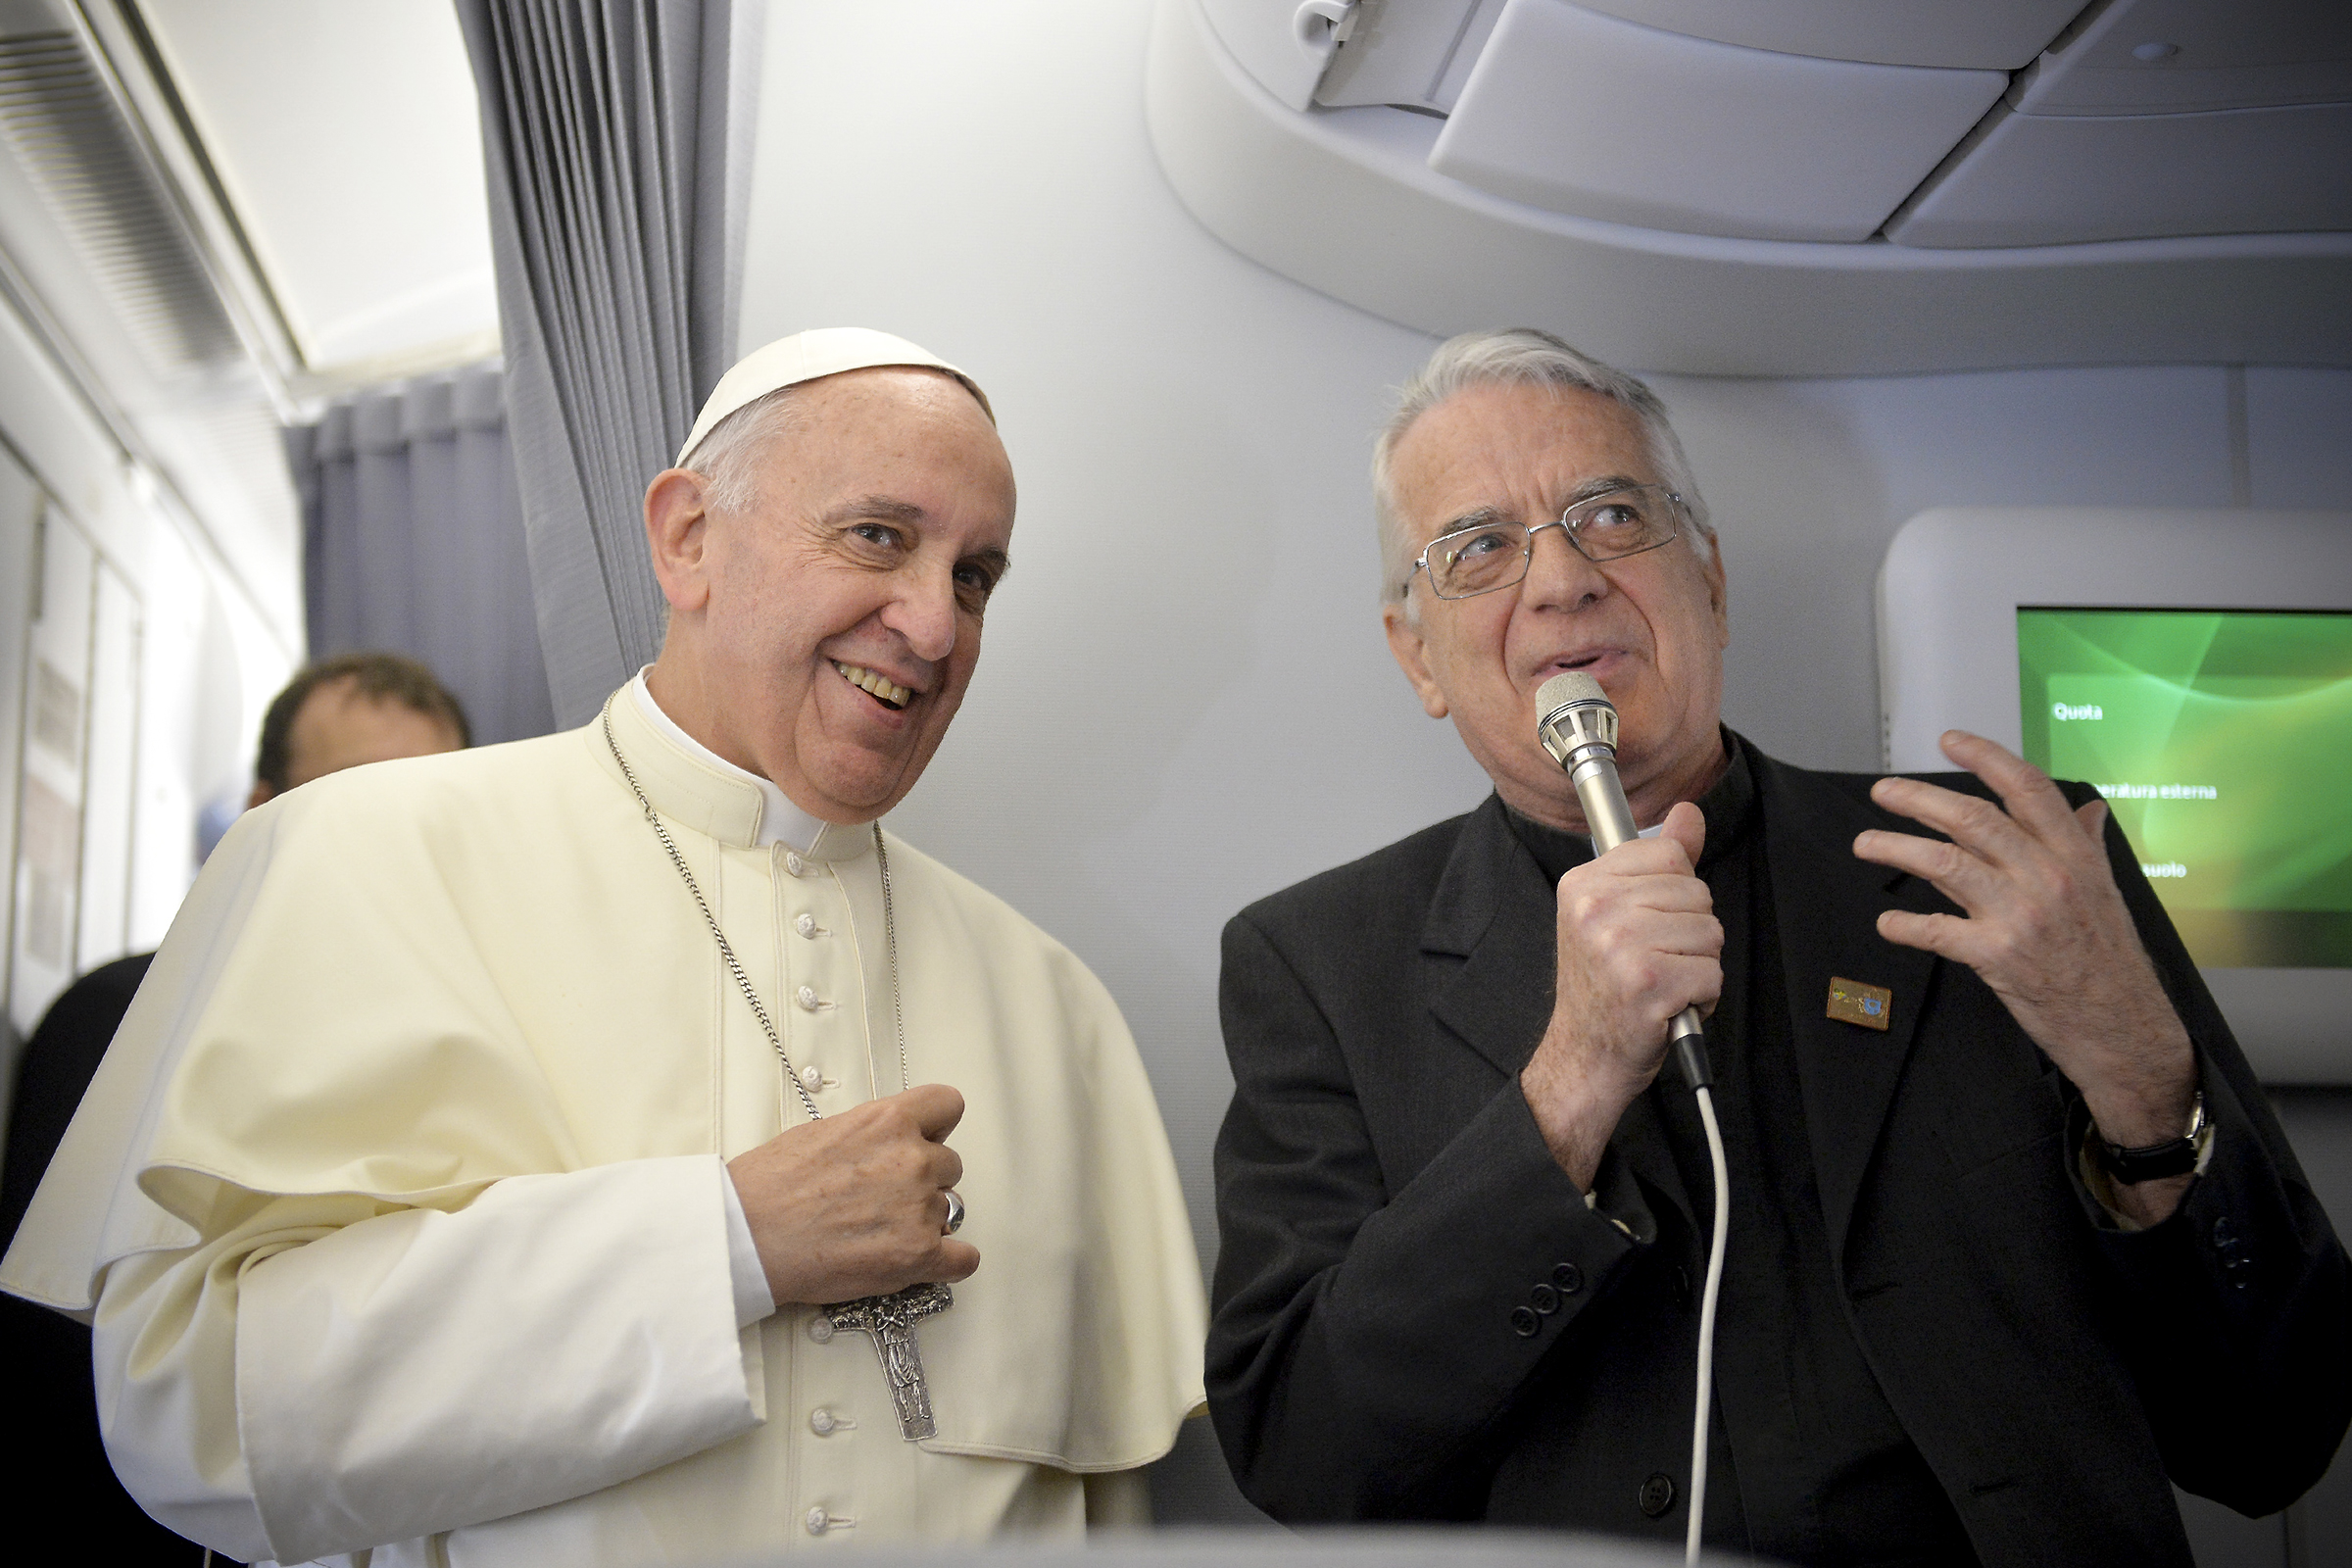 Pope Francis (L) and father Federico Lombardi greet journalists of the papal flight upon arrival in Rio de Janeiro on July 22, 2013. Pope Francis landed in Brazil on Monday for his first overseas trip as pontiff to attend the international festival World Youth Day in Brazil, the world's biggest Catholic country.    AFP PHOTO/LUCA ZENNARO/POOL / AFP PHOTO / POOL / LUCA ZENNARO